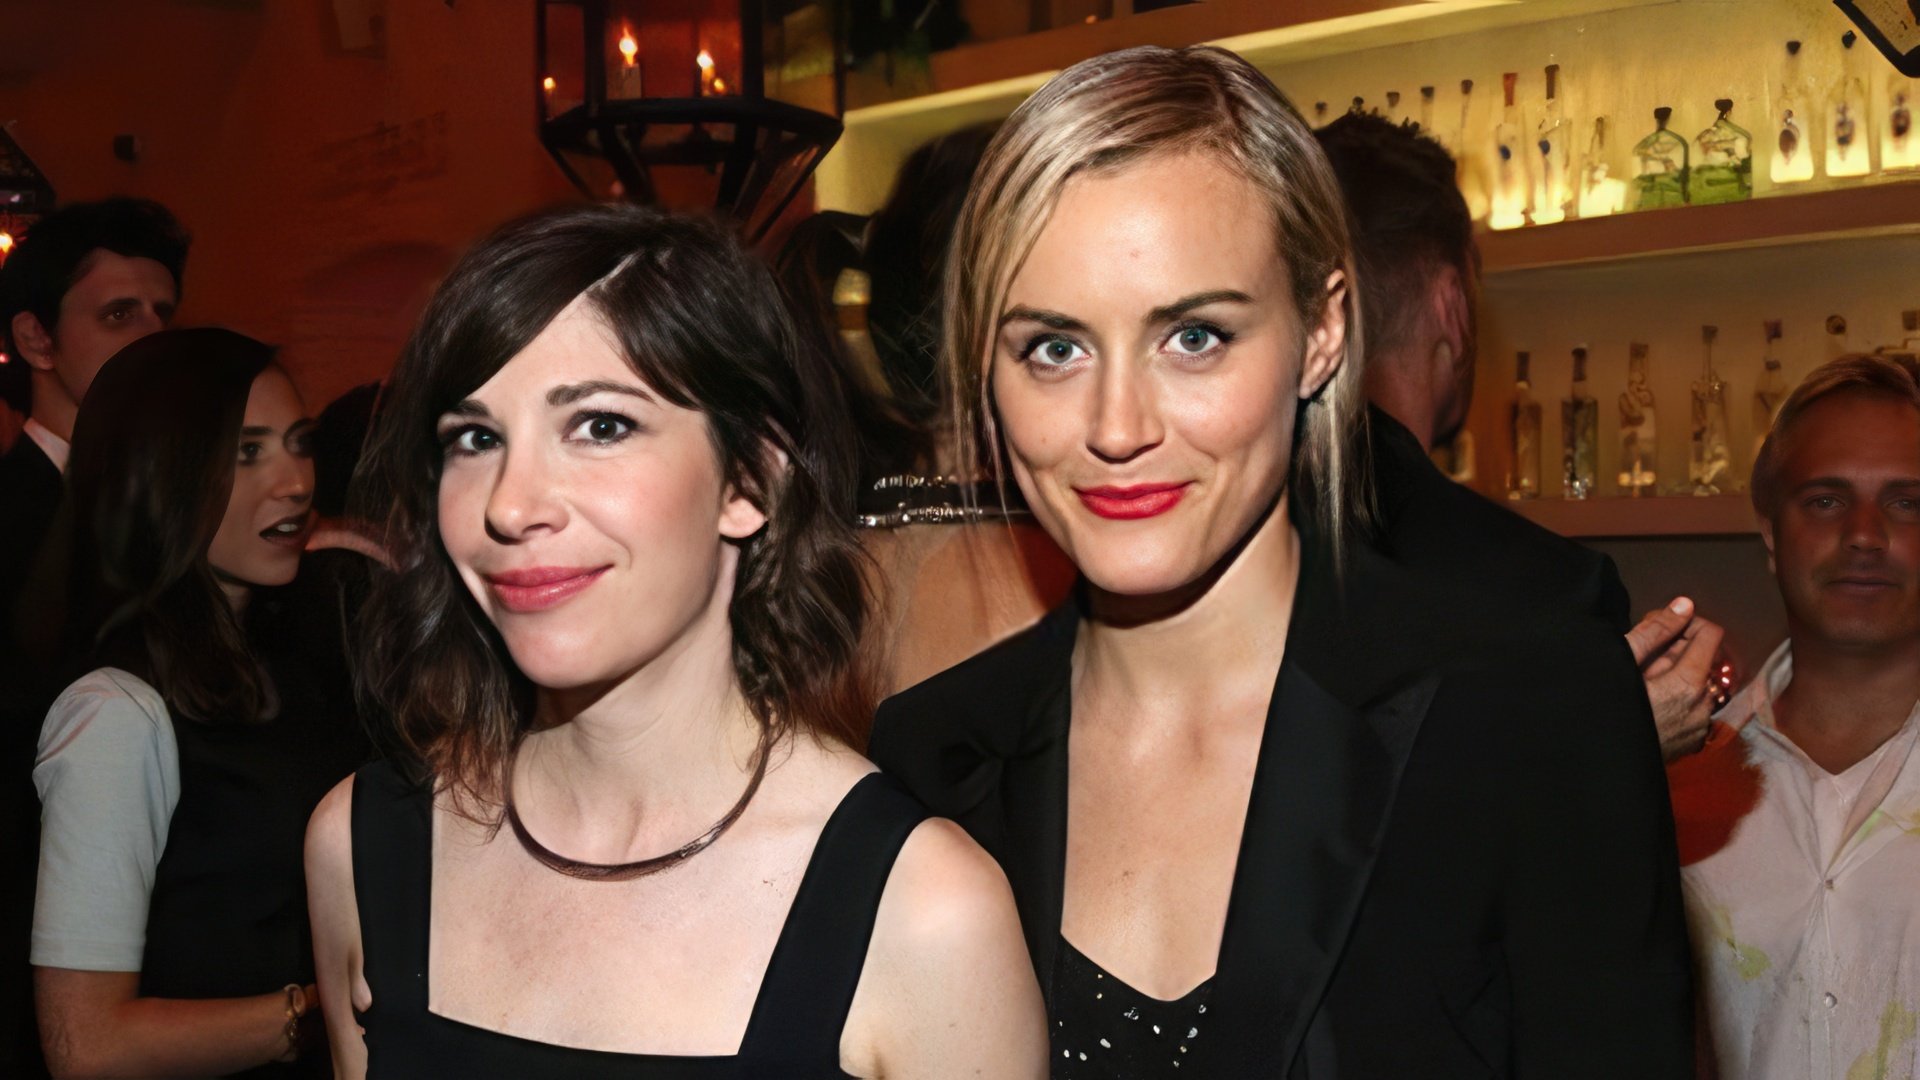 Taylor Schilling and Carrie Brownstein